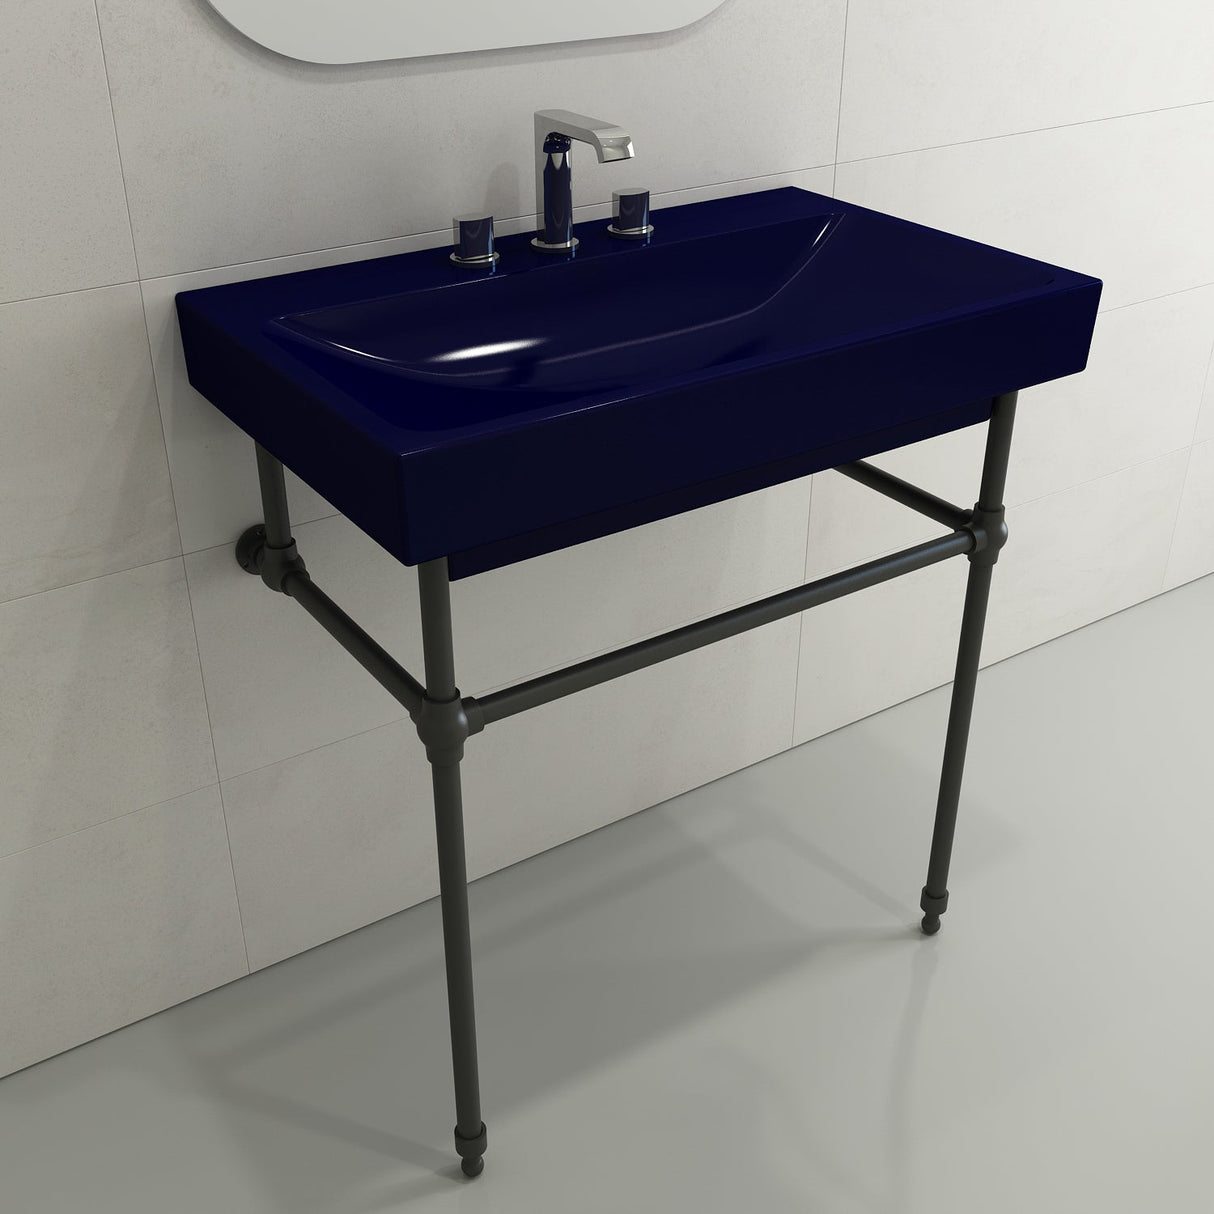 BOCCHI 1078-010-0127 Scala Arch Wall-Mounted Sink Fireclay 32 in. 3-Hole in Sapphire Blue